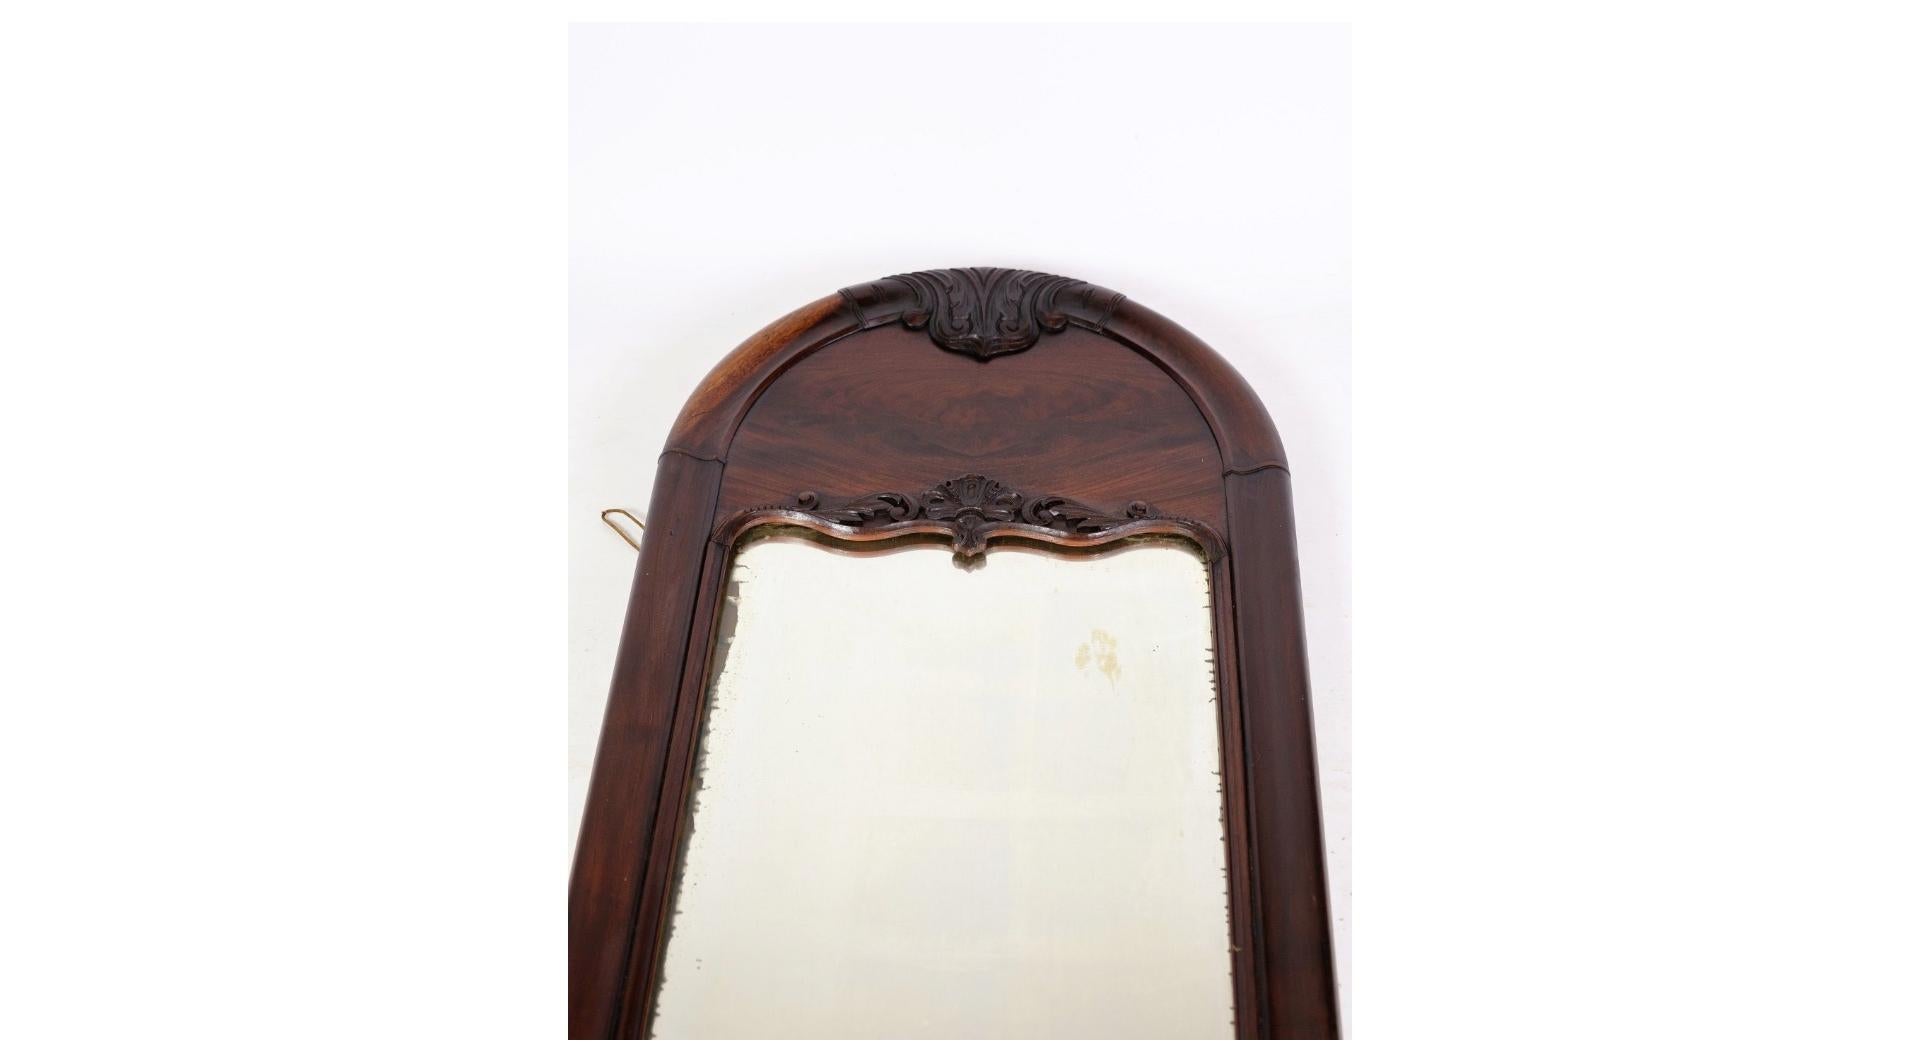 The antique Christian VIII mahogany mirror from the 1860s is an enchanting piece of furniture history that exudes true elegance and timeless beauty. This mirror carries a legacy of craftsmanship and aesthetic sophistication characteristic of the